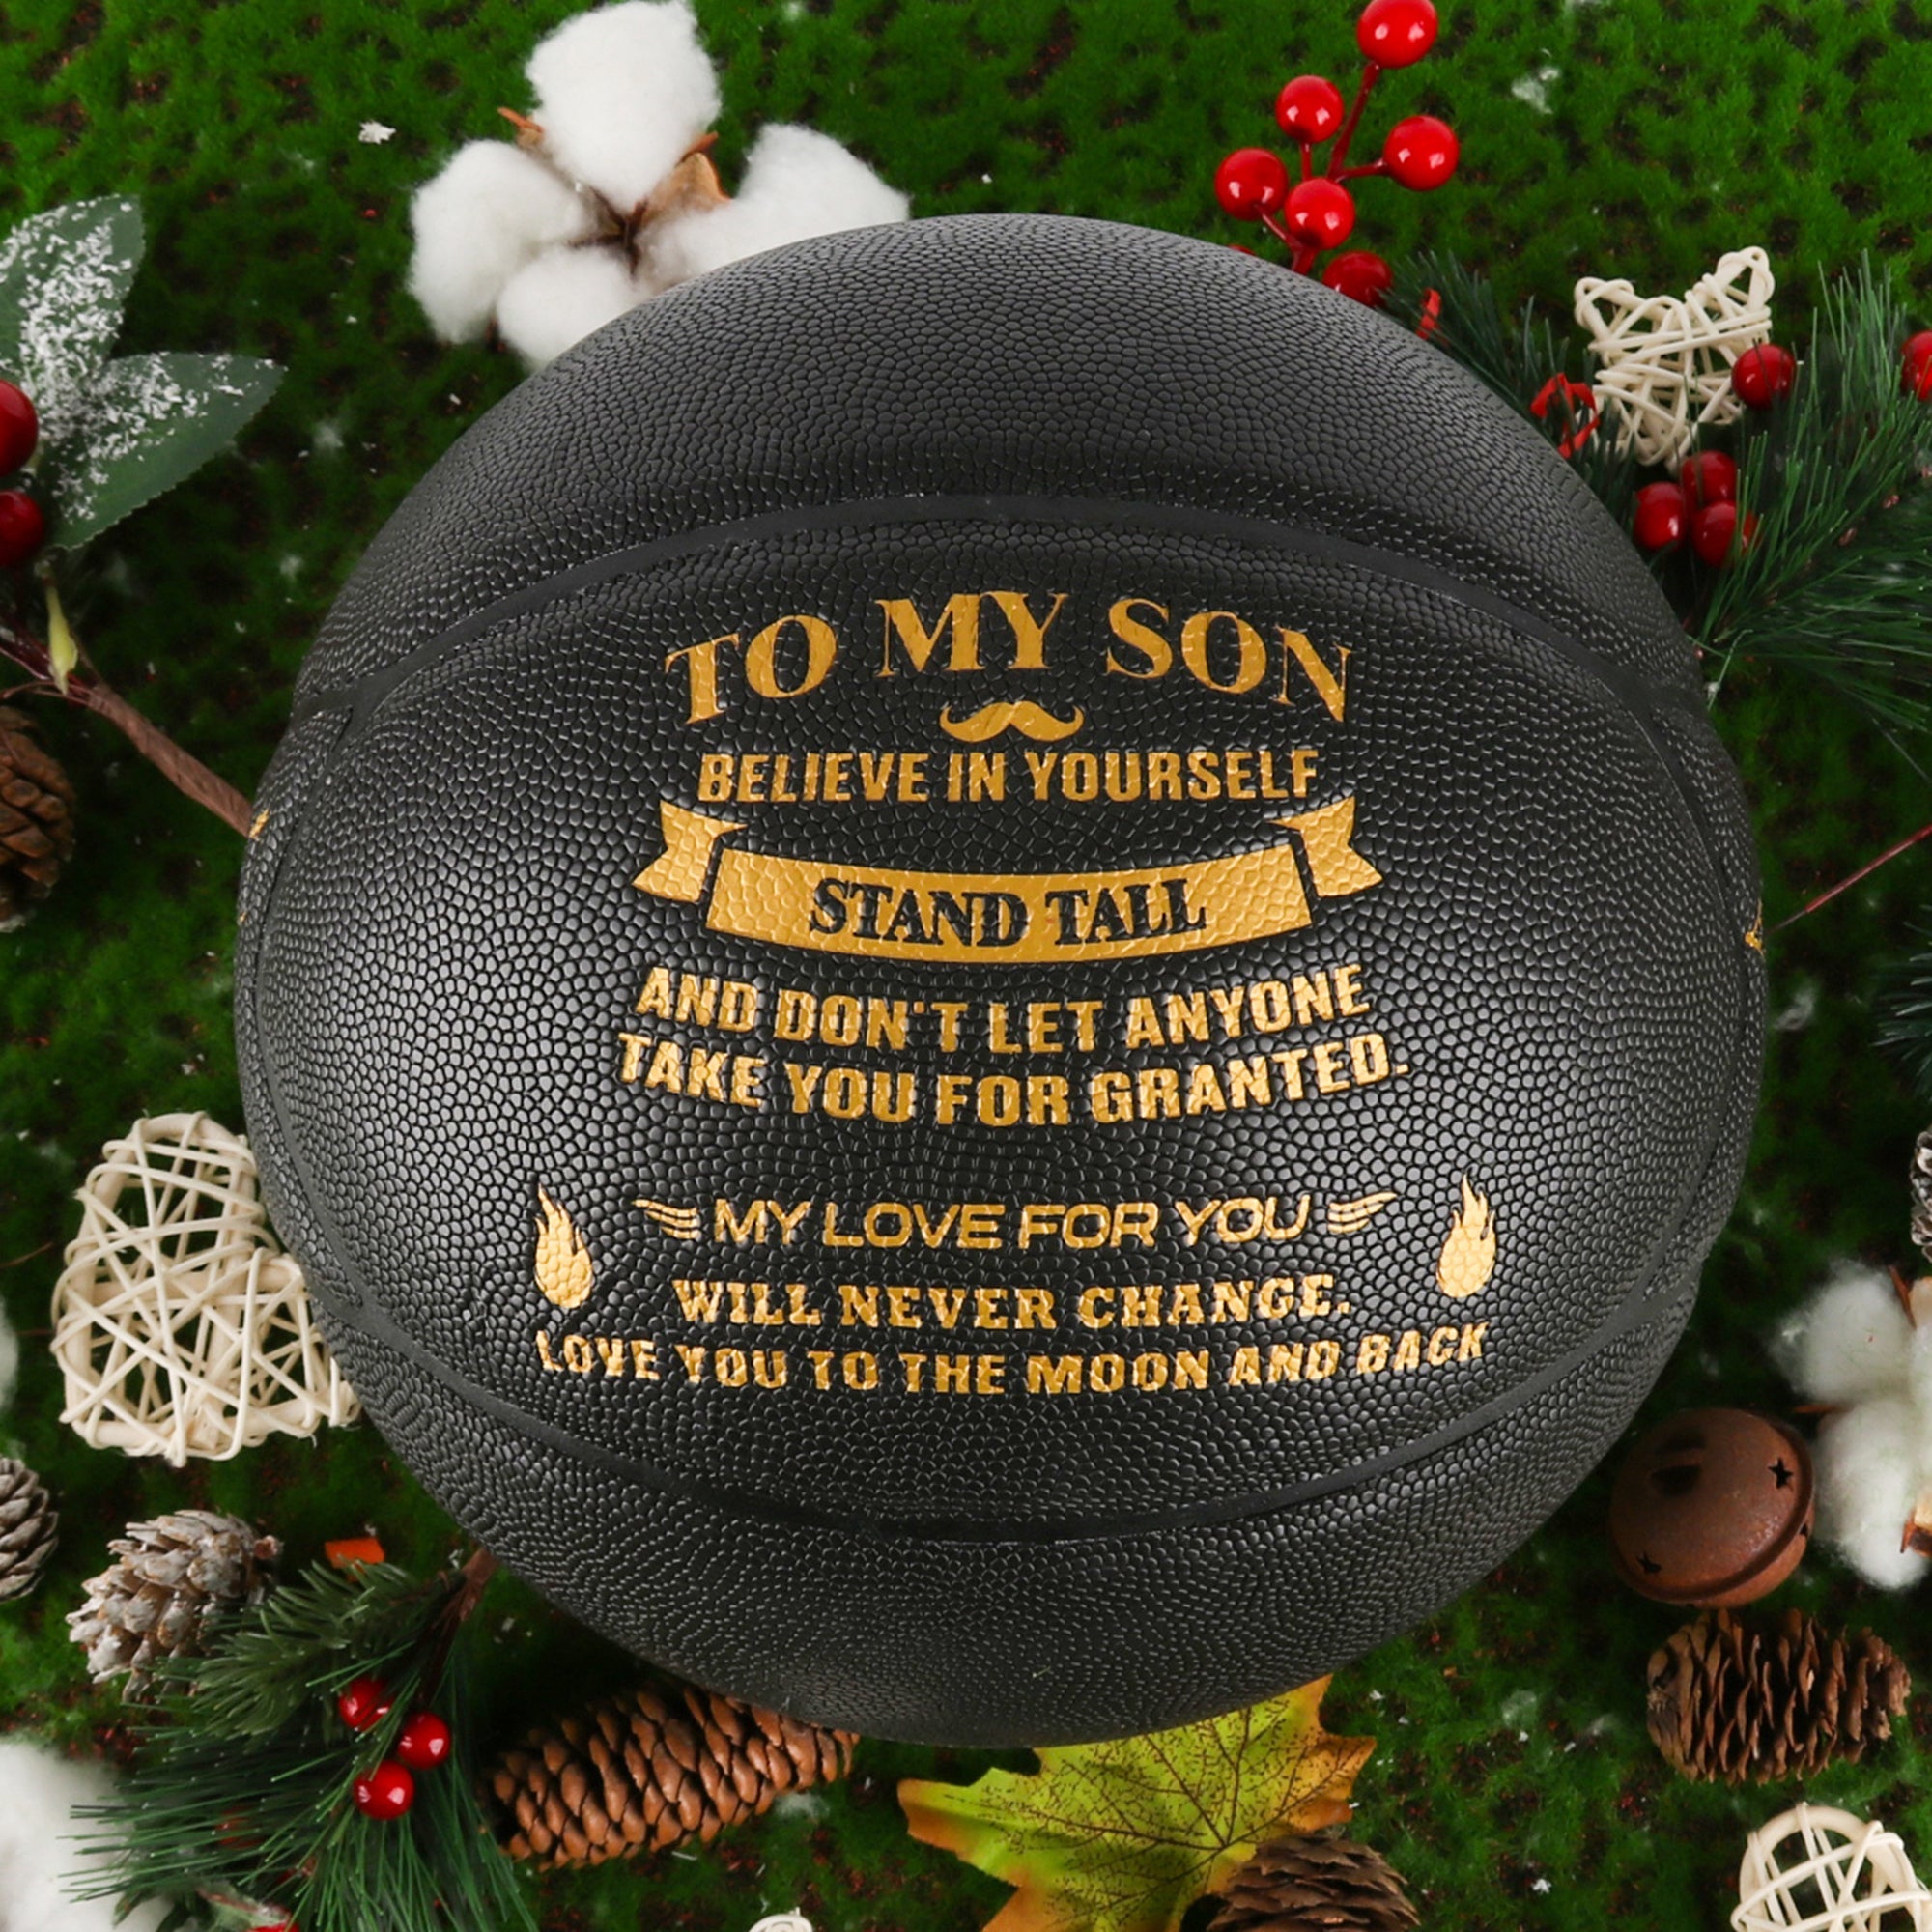 Personalized Letter Basketball For Son, Basketball Indoor/Outdoor Game Ball For Boy, Birthday Christmas Gift For Son,Black - Family Watchs